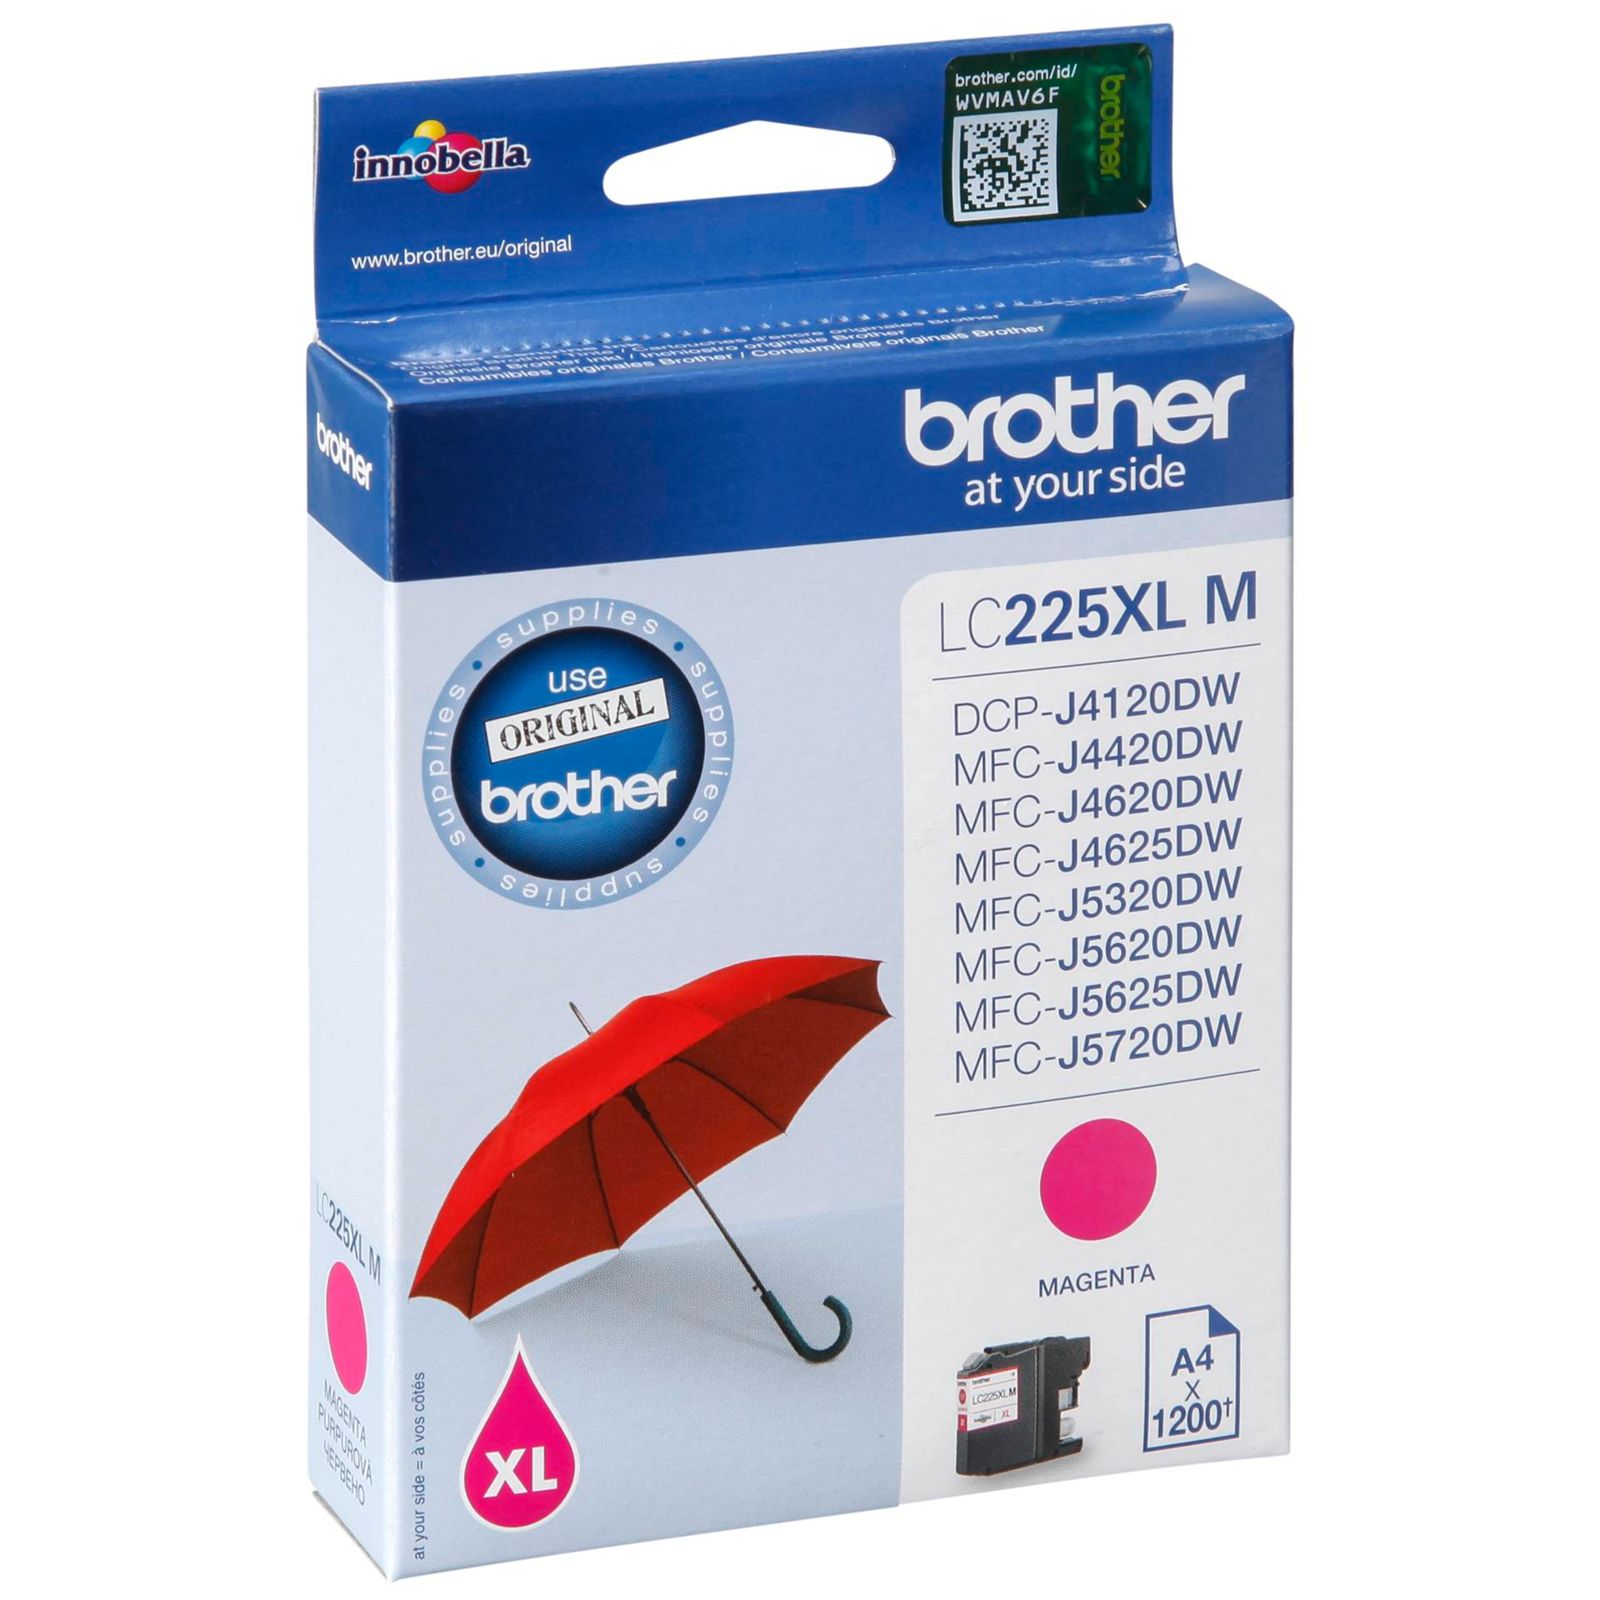 Brother LC-225XL M magenta